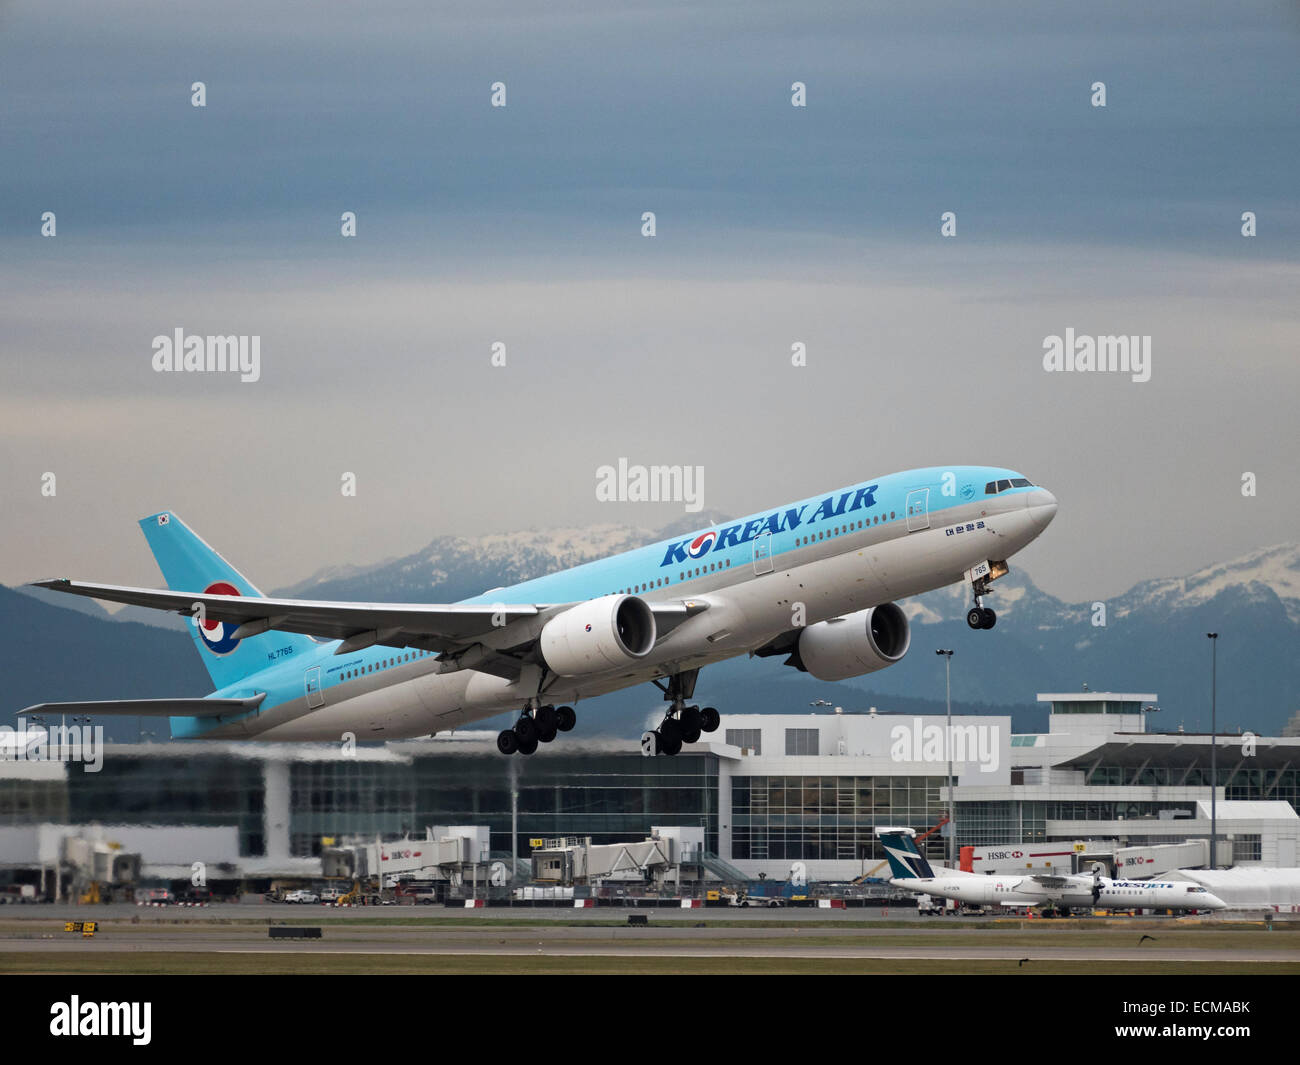 Korean Air Airlines plane airplane Boeing 777-200ER (HL7765) airliner taking off Vancouver International Airport Stock Photo